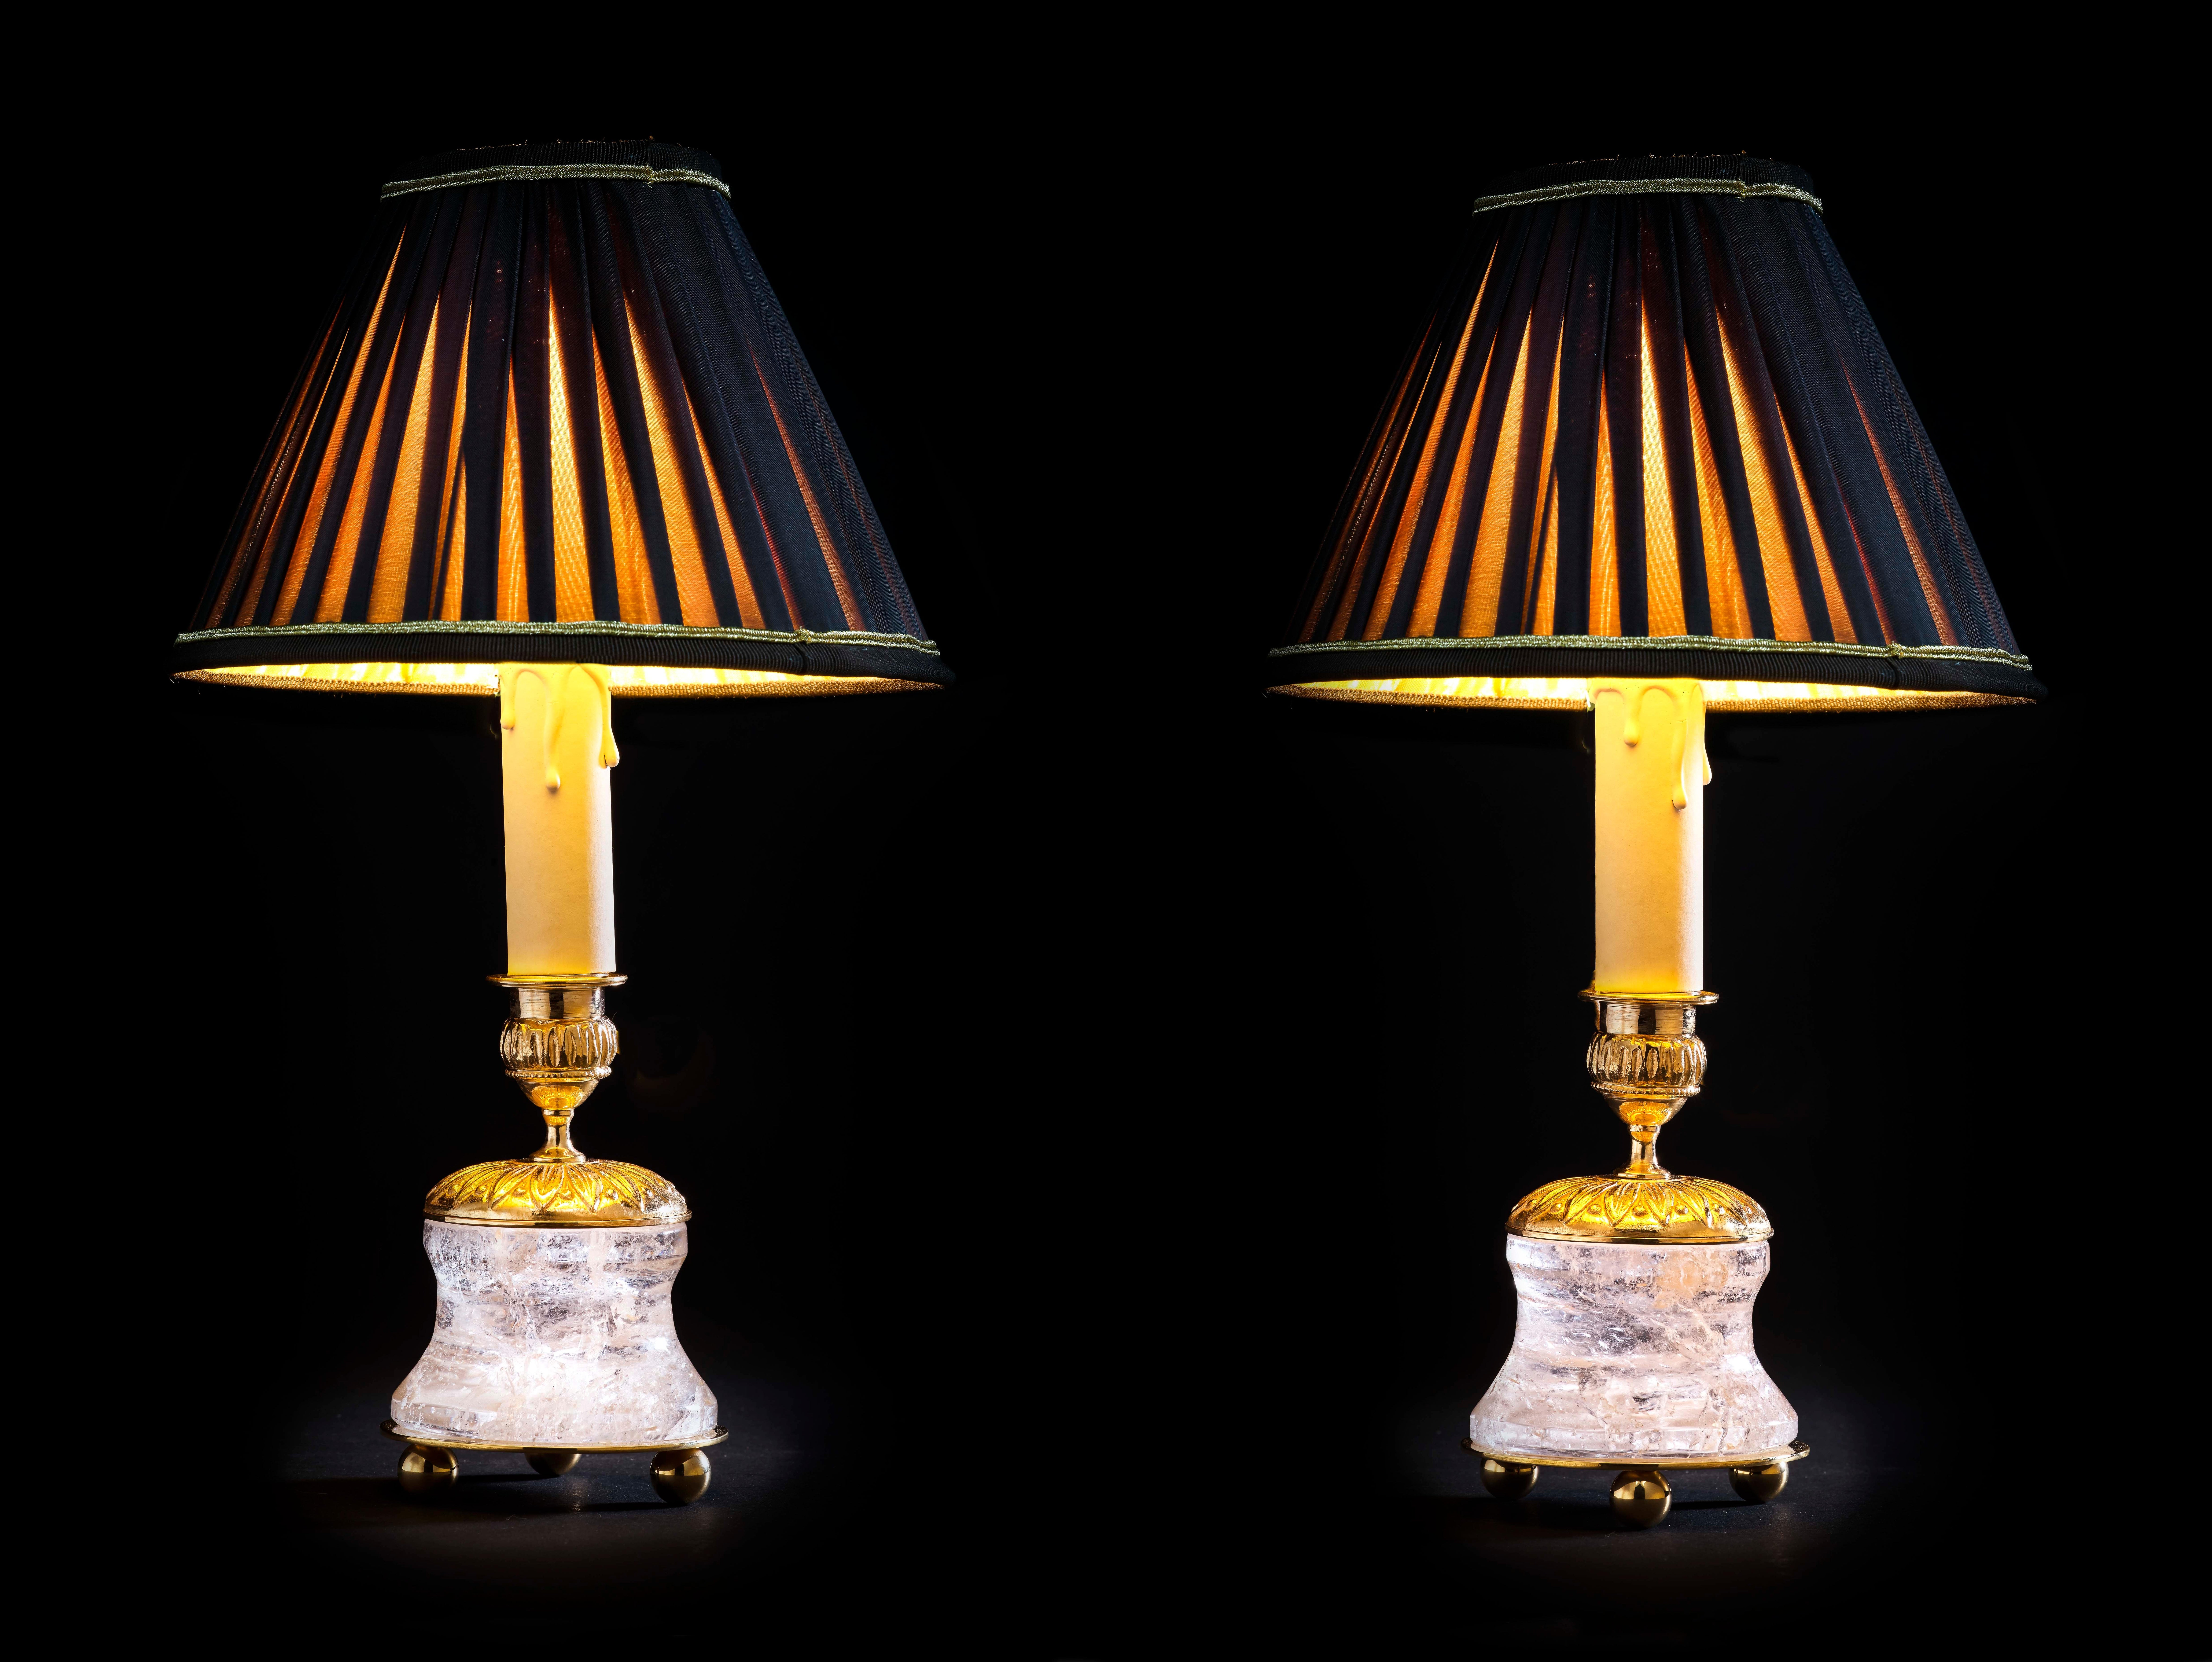 Rock crystal French First Empire style 24-karat ormolu gilding bronze brown lampshades made by Alexandre Vossion.
This model can be also used as candlesticks to make your dining table so chic...
Others colors for the lampshades are also available